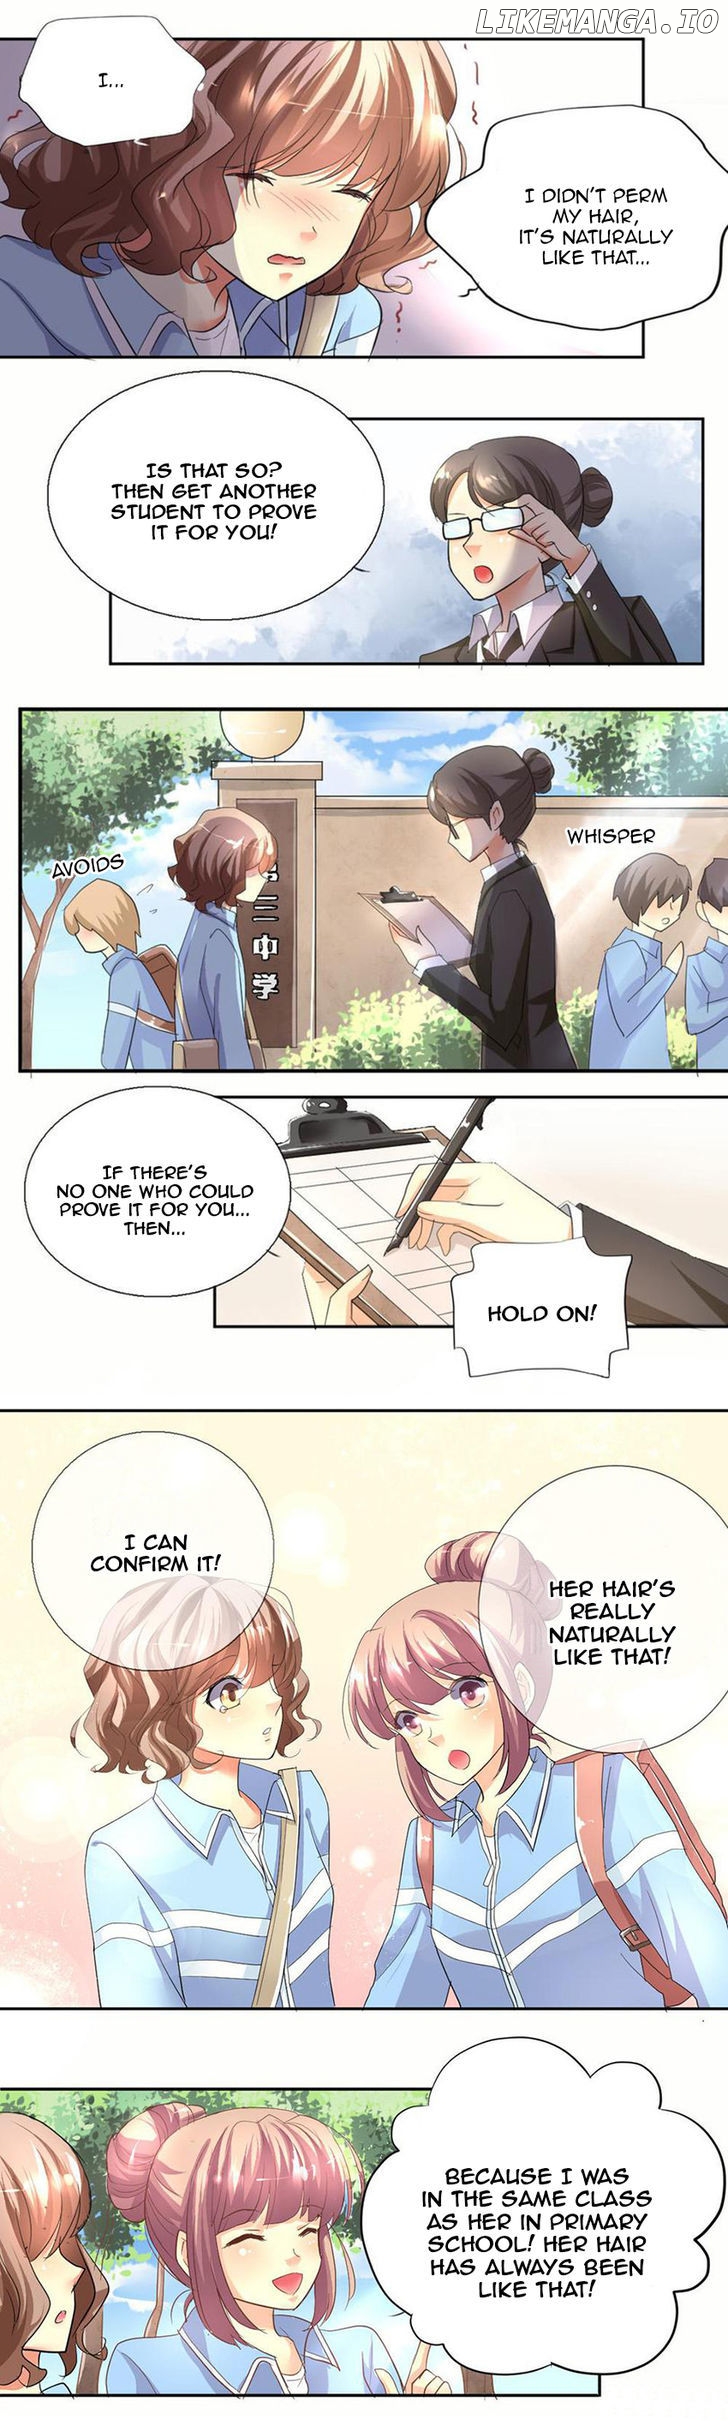 She Who's Most Special To Me chapter 4 - page 4